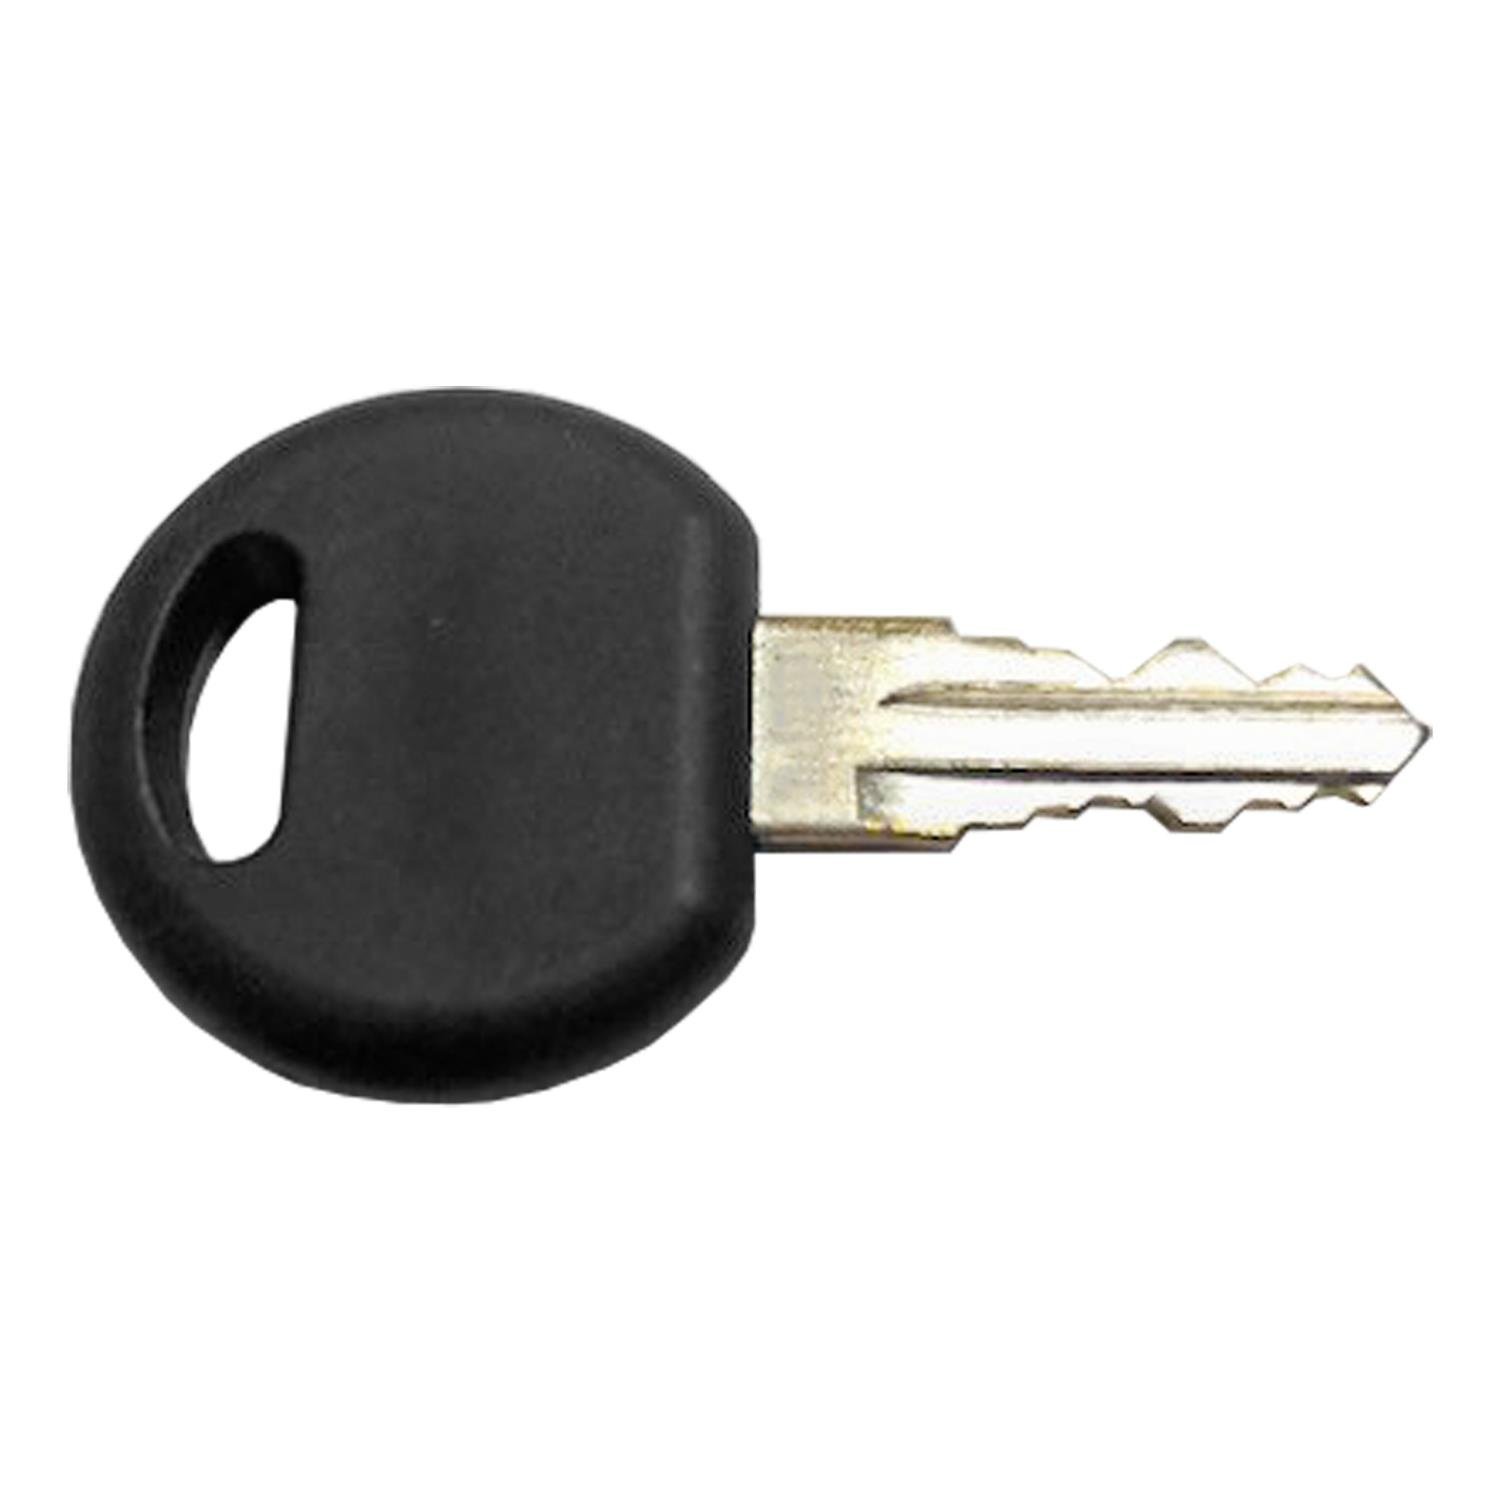 Replacement Secure Lock Truck Tool Box Key